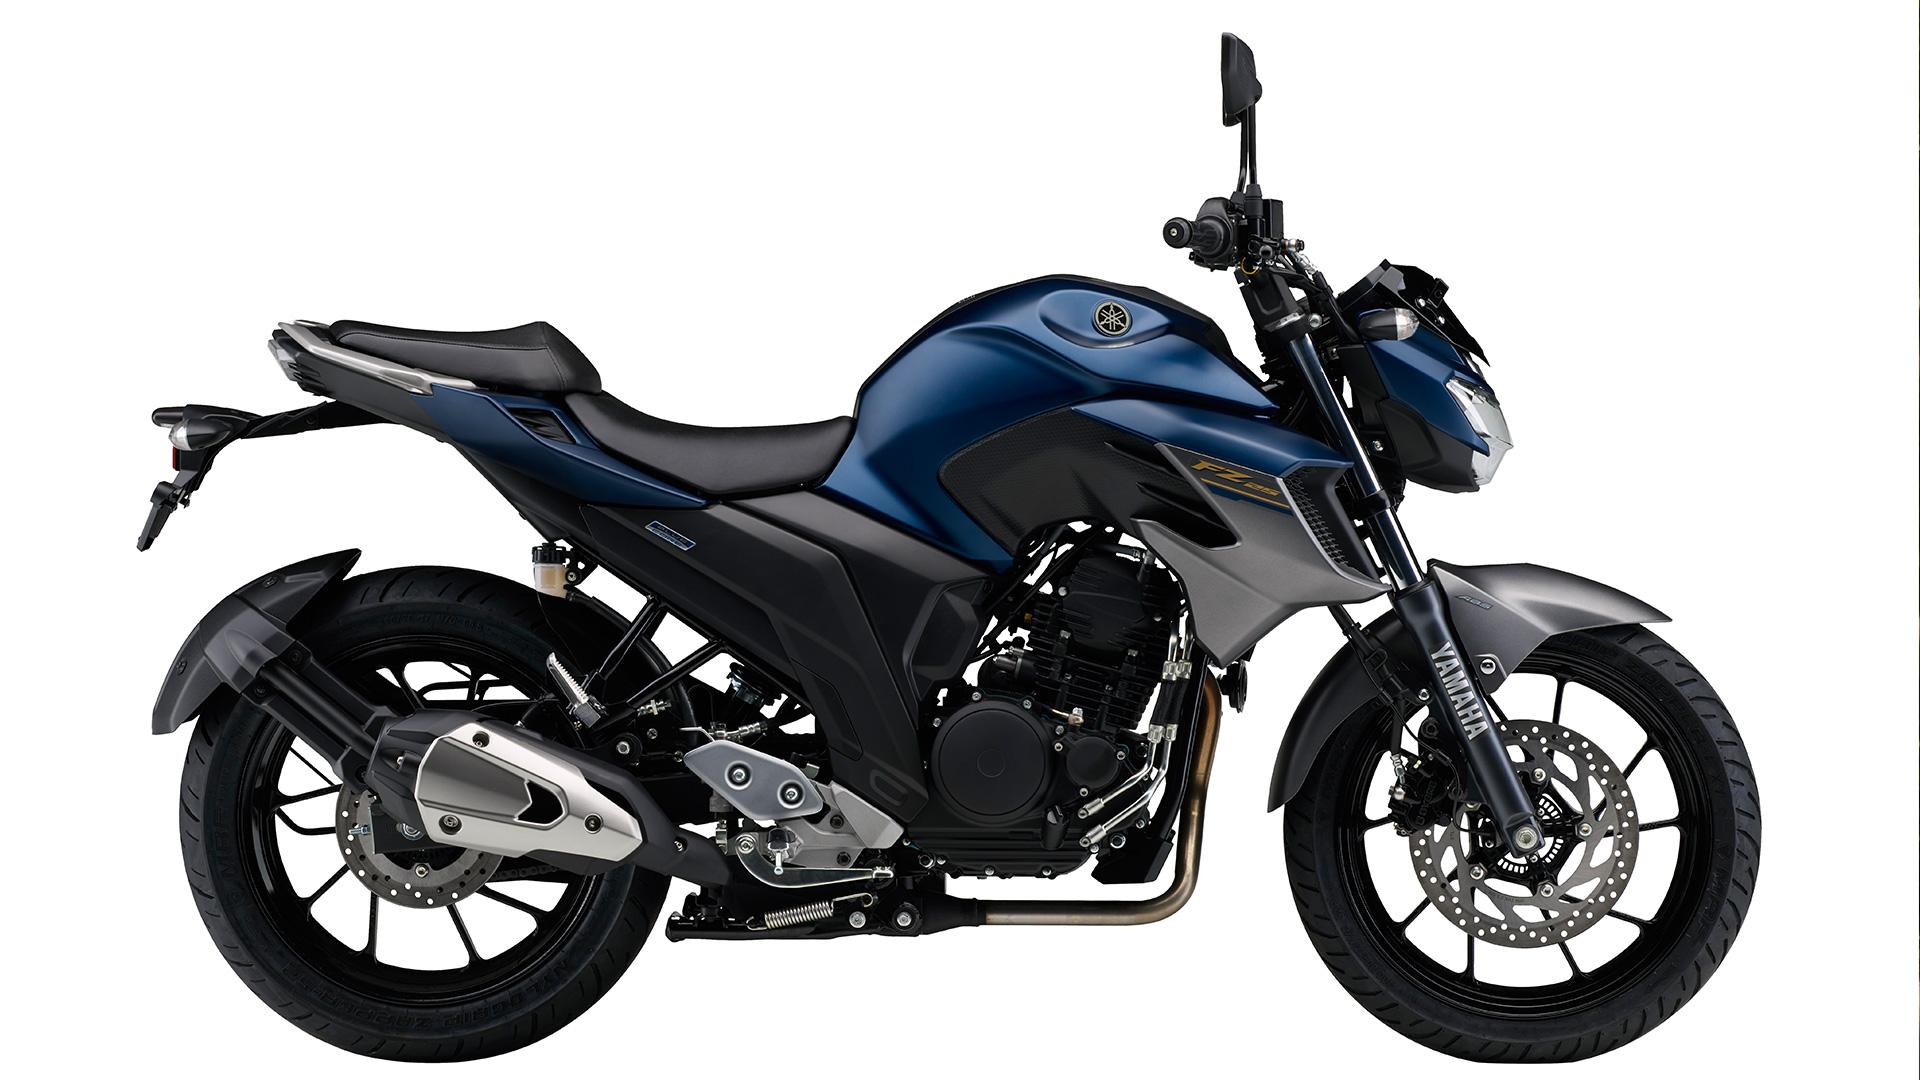 Yamaha FZ 25 2019, Mileage, Reviews, Specification, Gallery